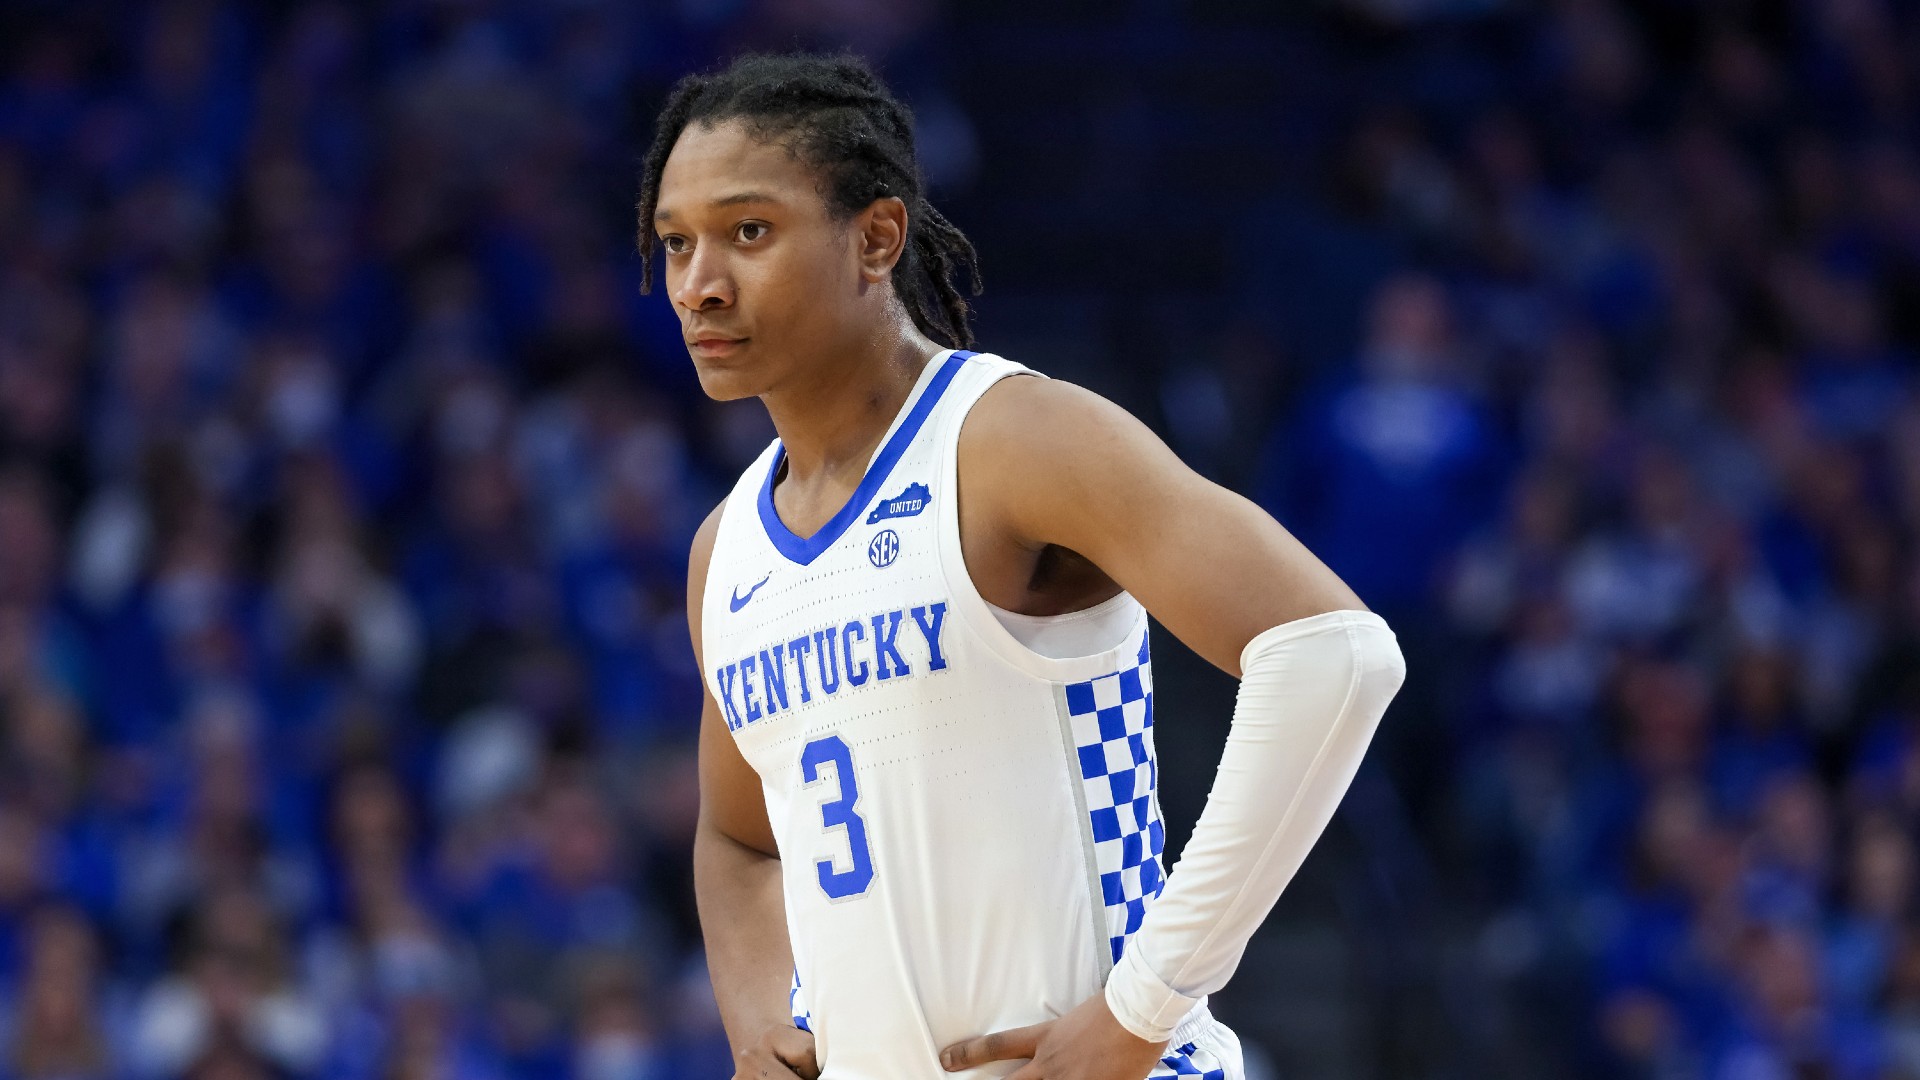 Saint Peter’s vs. Kentucky Odds, Picks, Predictions: Are Wildcats Overvalued In NCAA Tournament First Round? article feature image